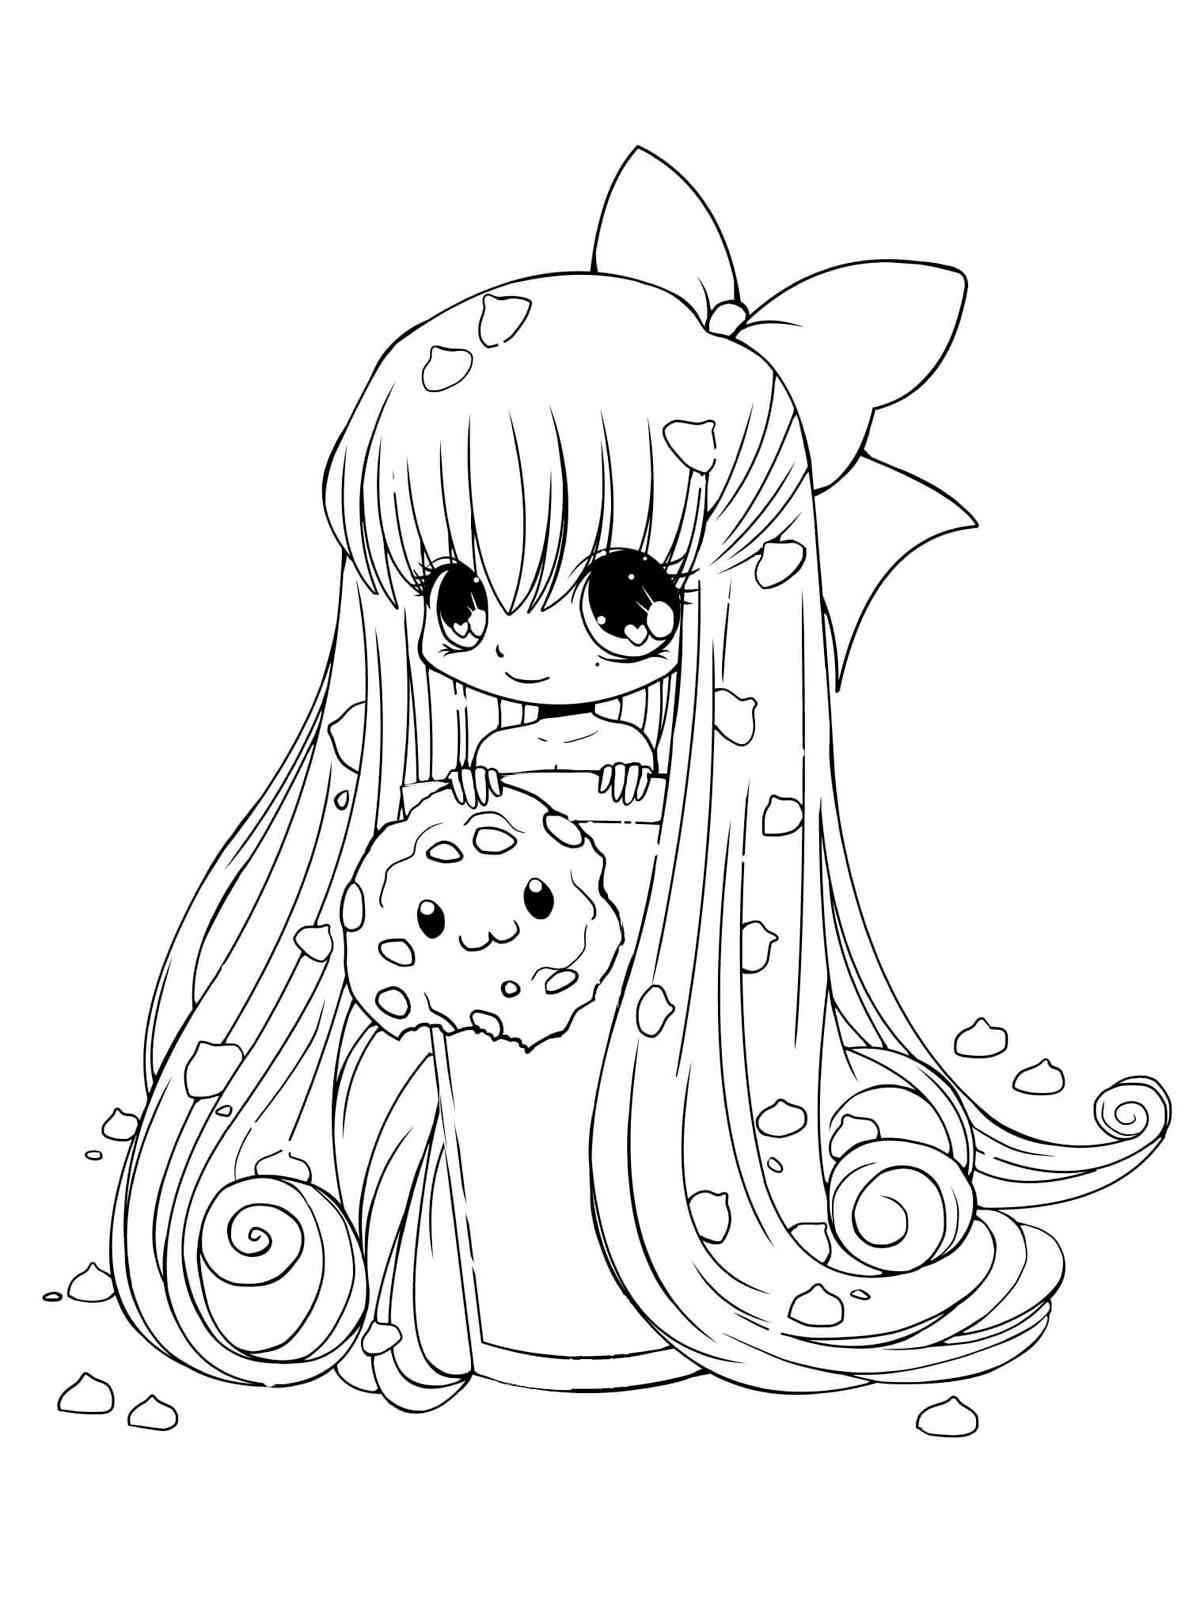 Anime Girl 33 coloring page